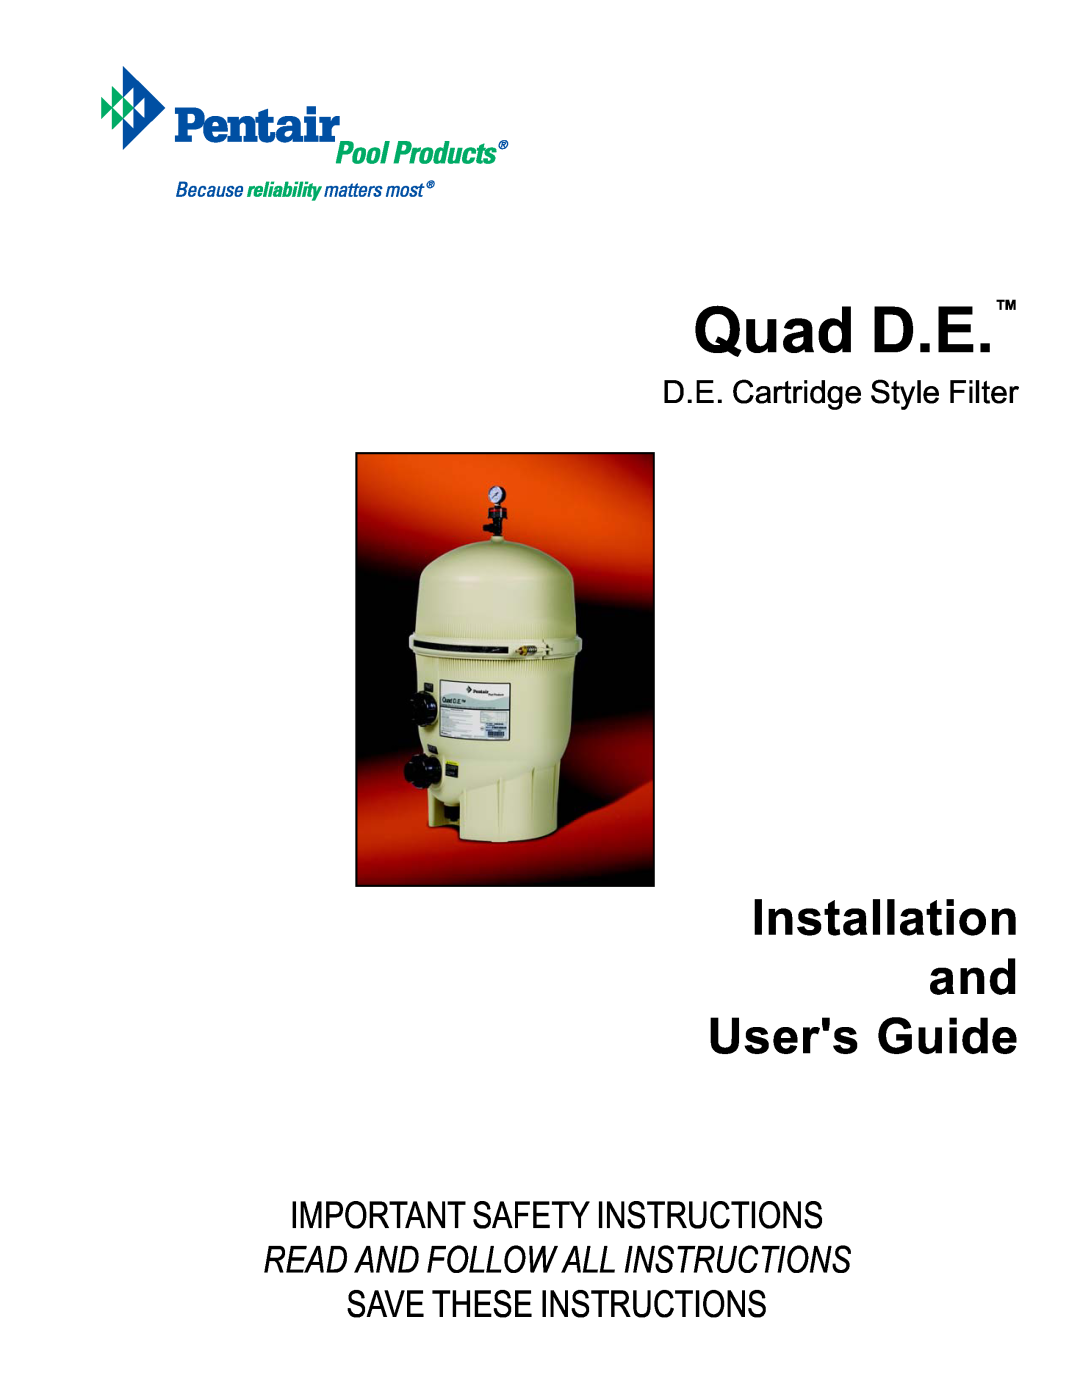 Pentair D.E. Cartridge Style Filter important safety instructions Quad D.E, Installation and Users Guide 